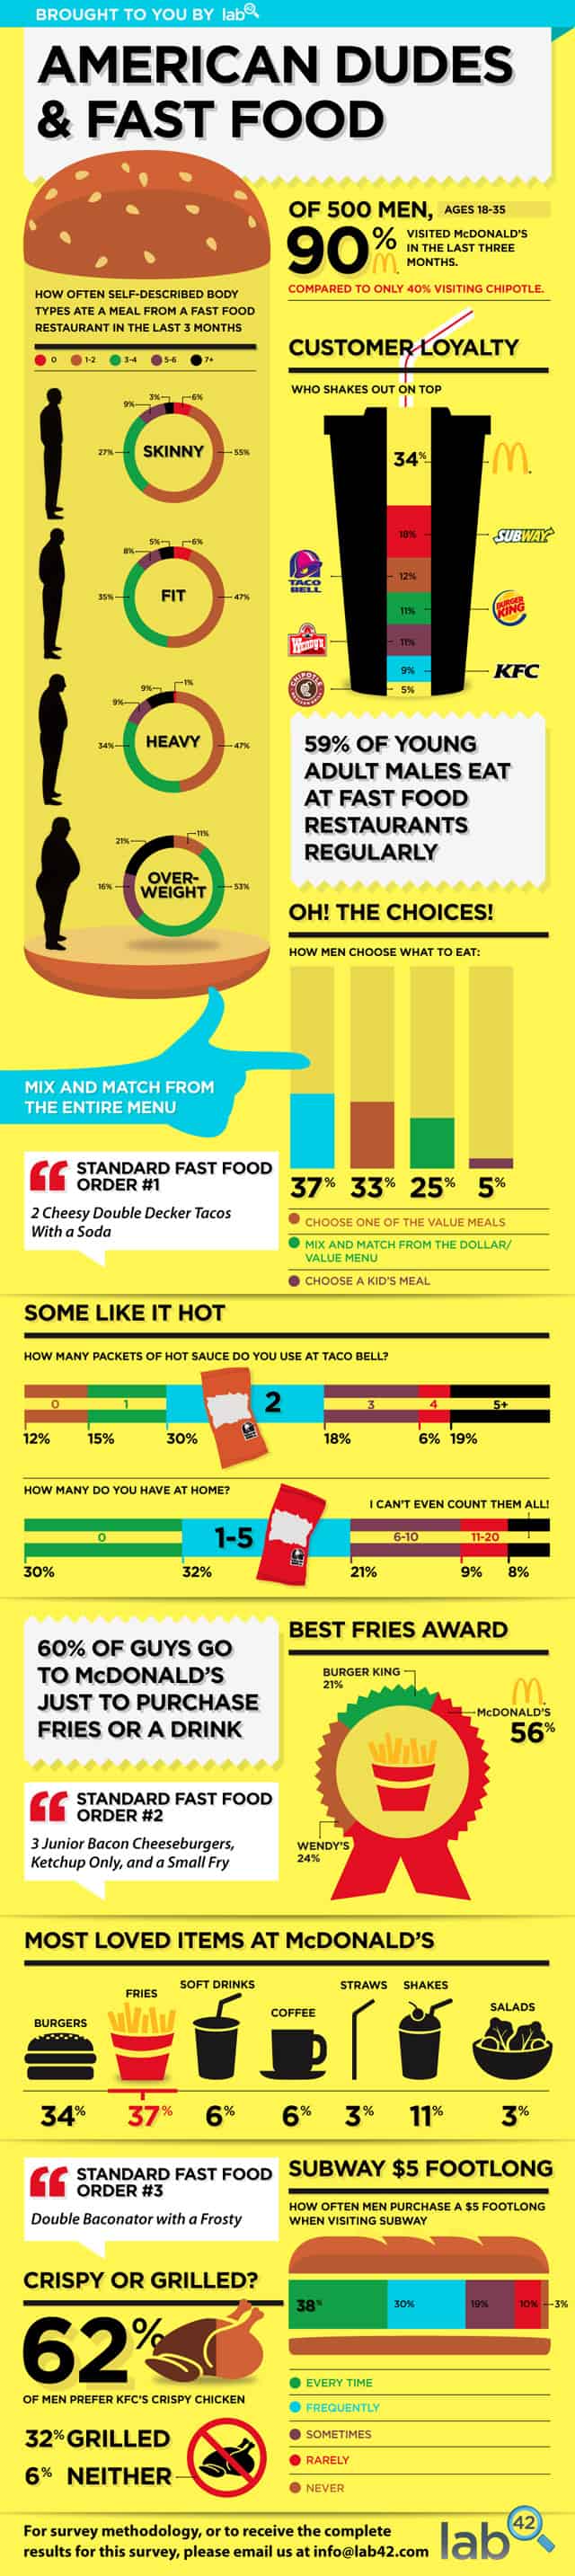 American Dudes & Fast Food Infographic